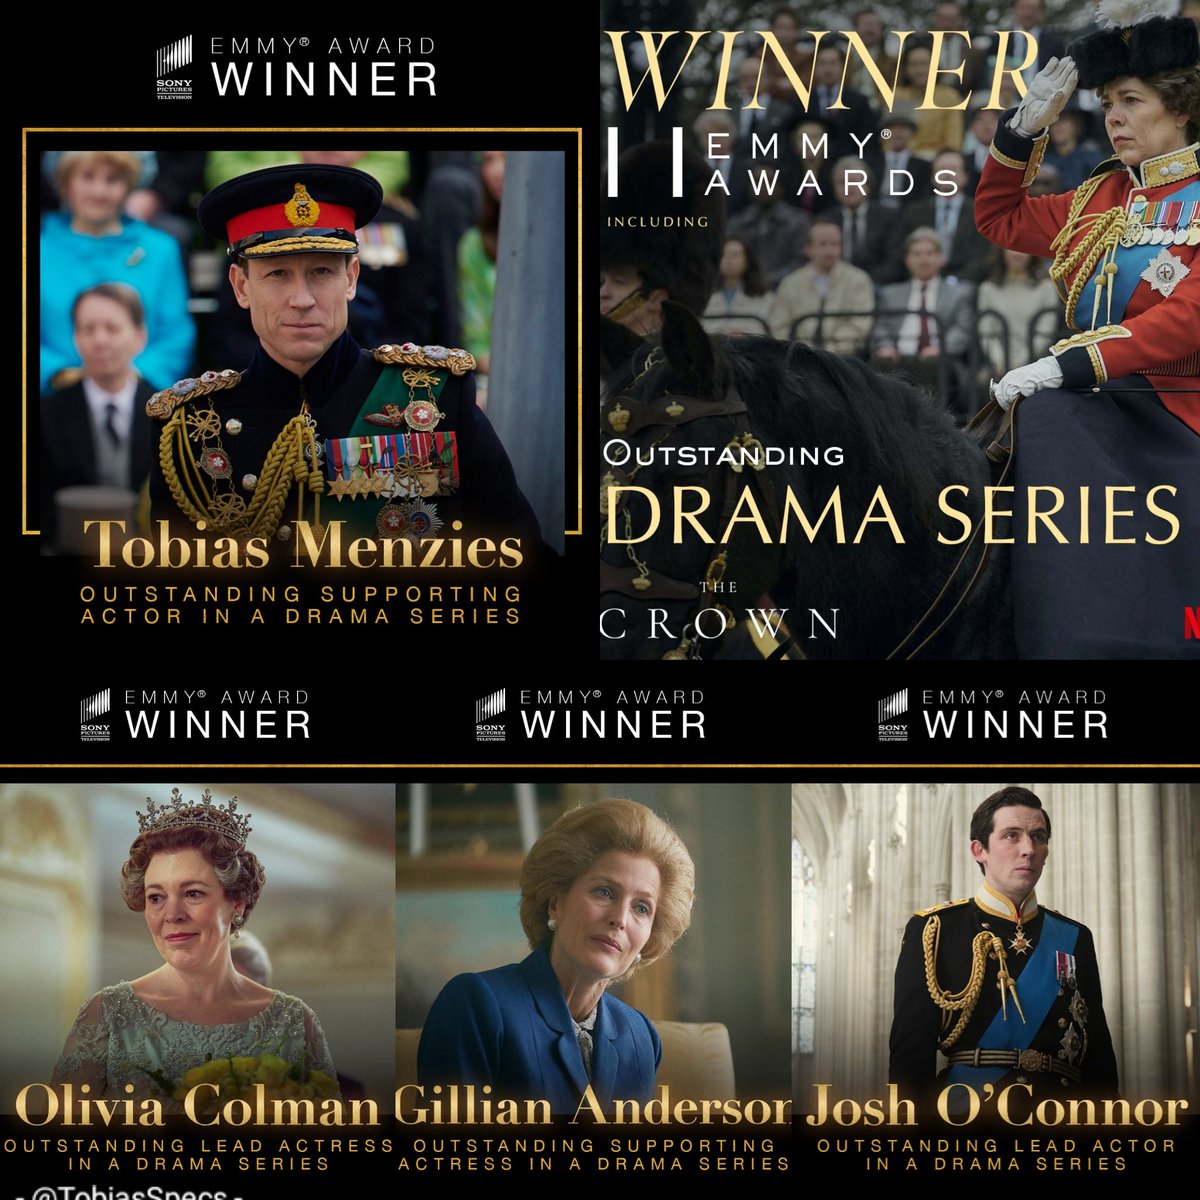 Congratulations to all @TheCrownNetflix Emmy Winners #TobiasMenzies #OliviaColman #GillianAnderson #JoshOConnor  and let's not forget #PeterMorgan &  #JessicaHobbs 
🏆🏆🏆🏆🏆🏆🏆
👏👏👏👏BRAVO👏👏👏👏